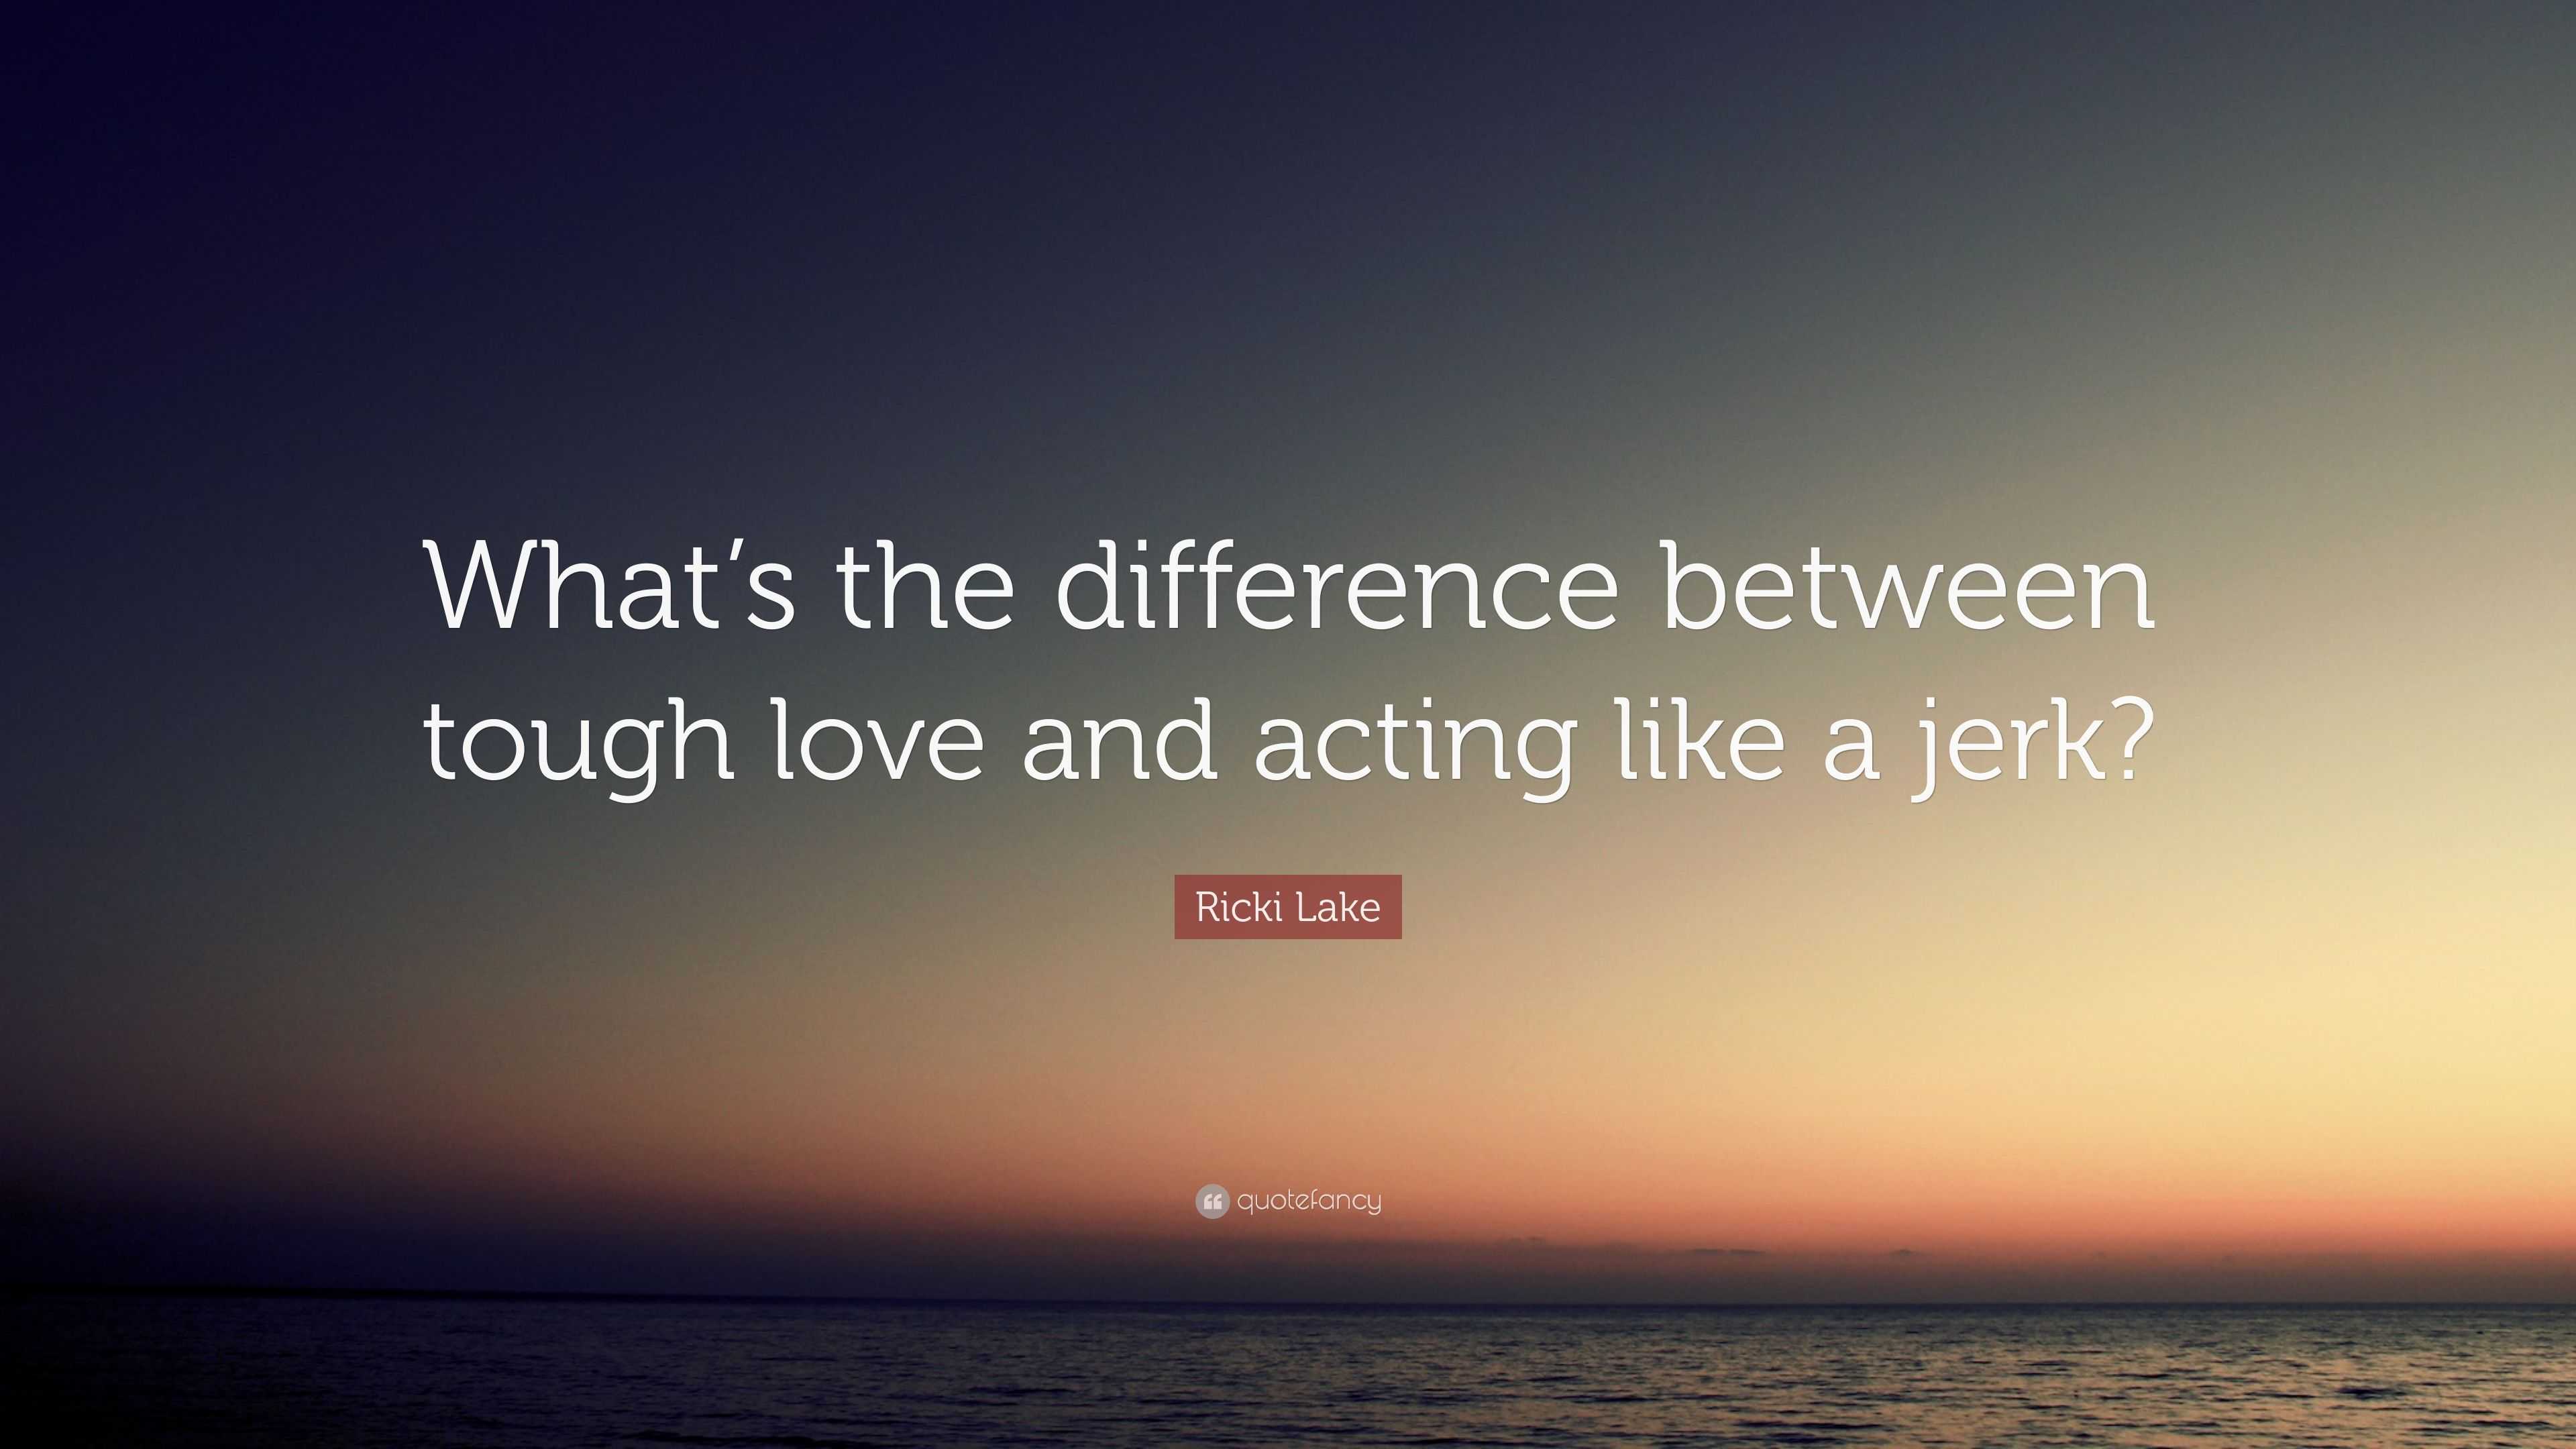 Ricki Lake Quote “What s the difference between tough love and acting like a jerk